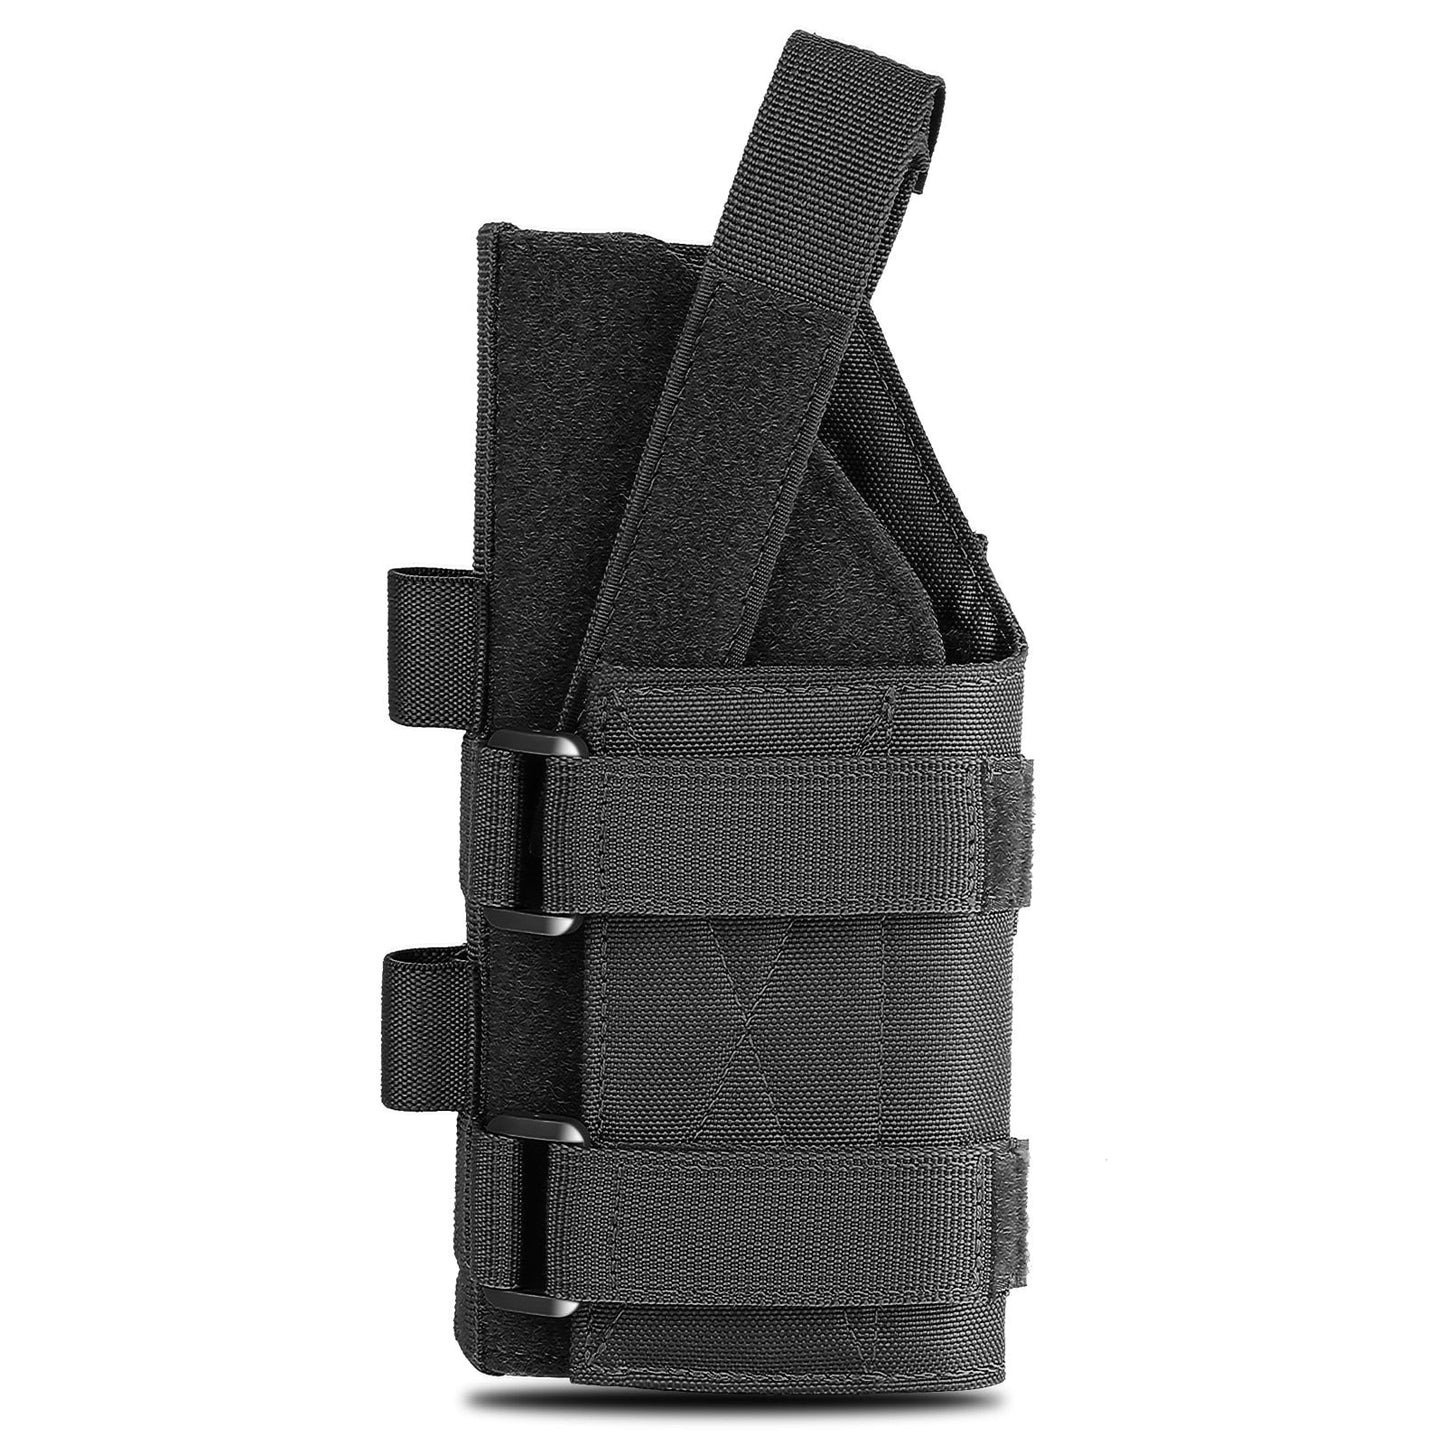 Holster universel réglable 9mm Glock 1911 G17 18 19 26 34 - ACTION AIRSOFT